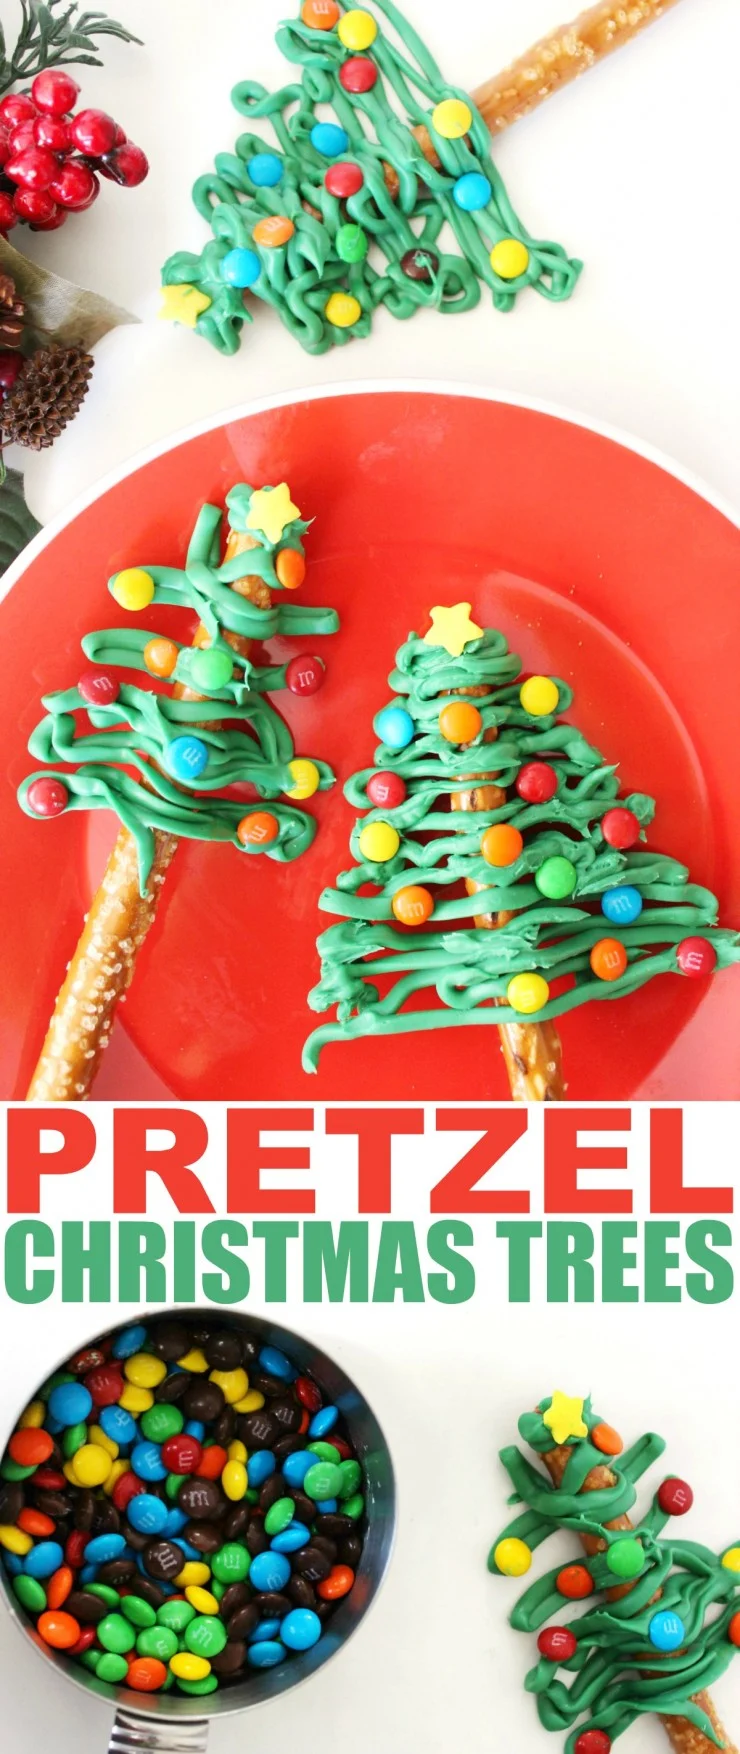 These Pretzel Christmas Trees make a simple and easy to make treat that look far more complicated than they really are. This of course makes them the perfect treat to impress your holiday party guests with!